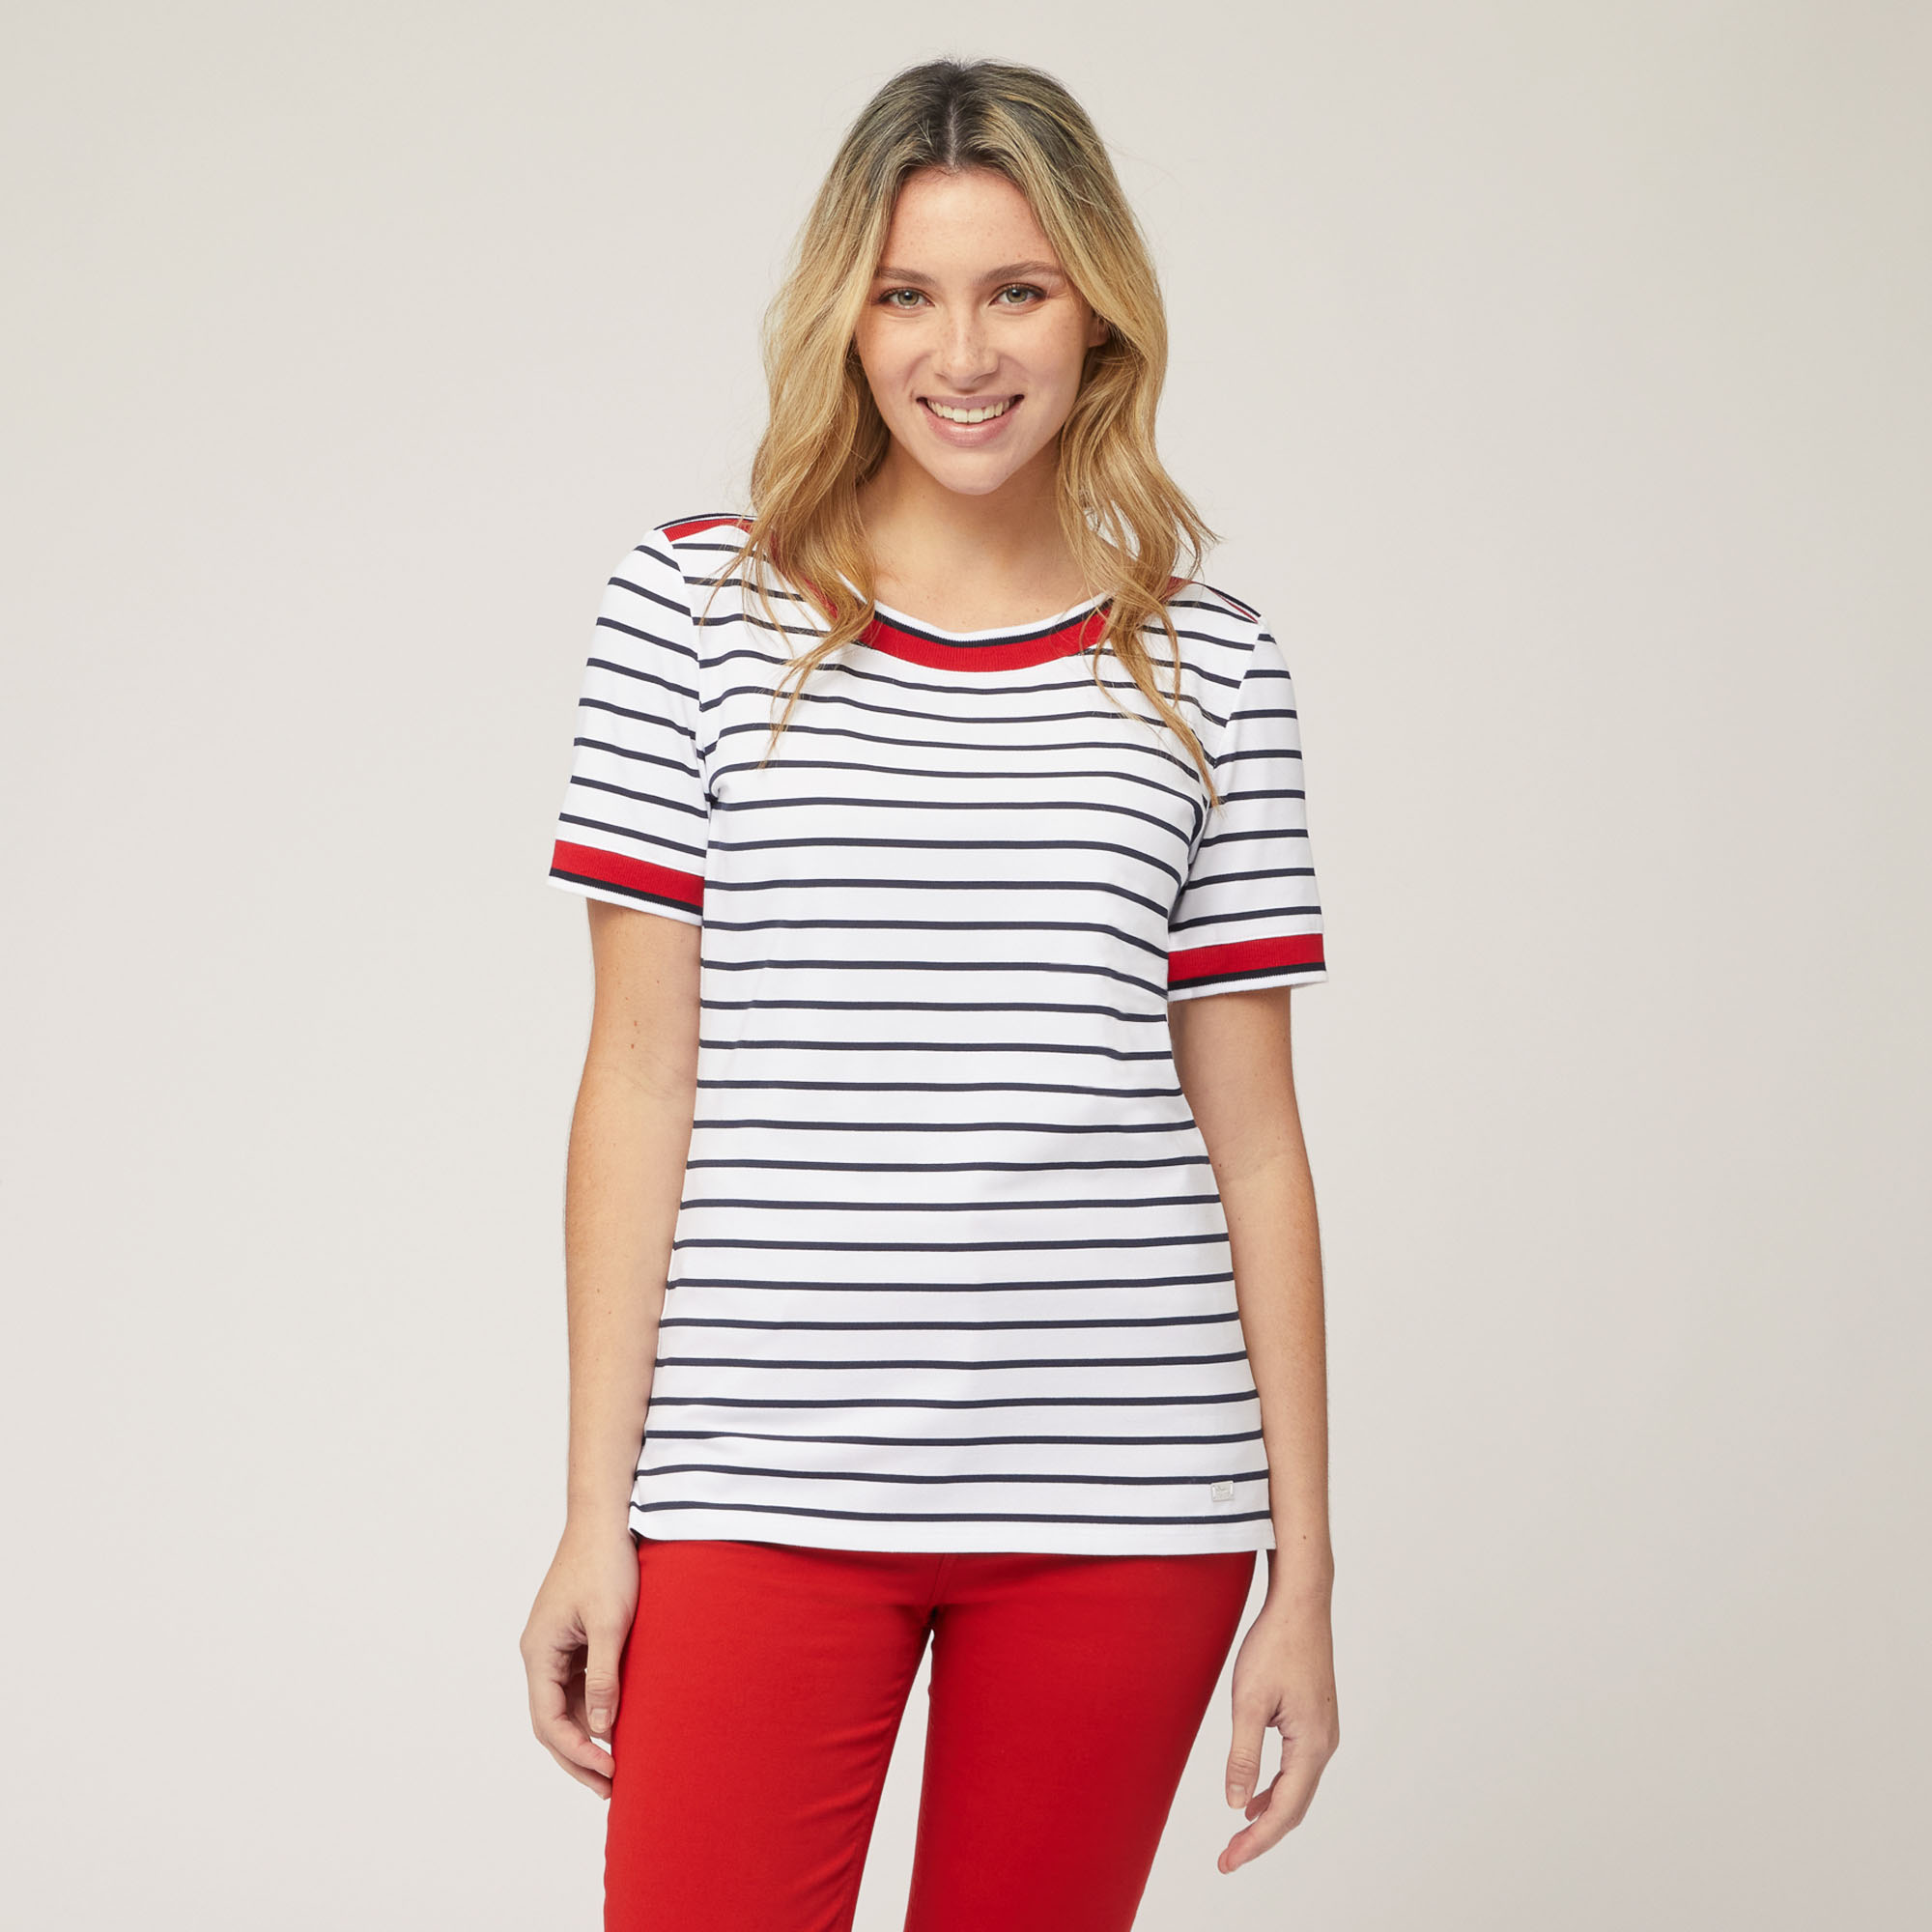 Striped T-Shirt with Contrasts